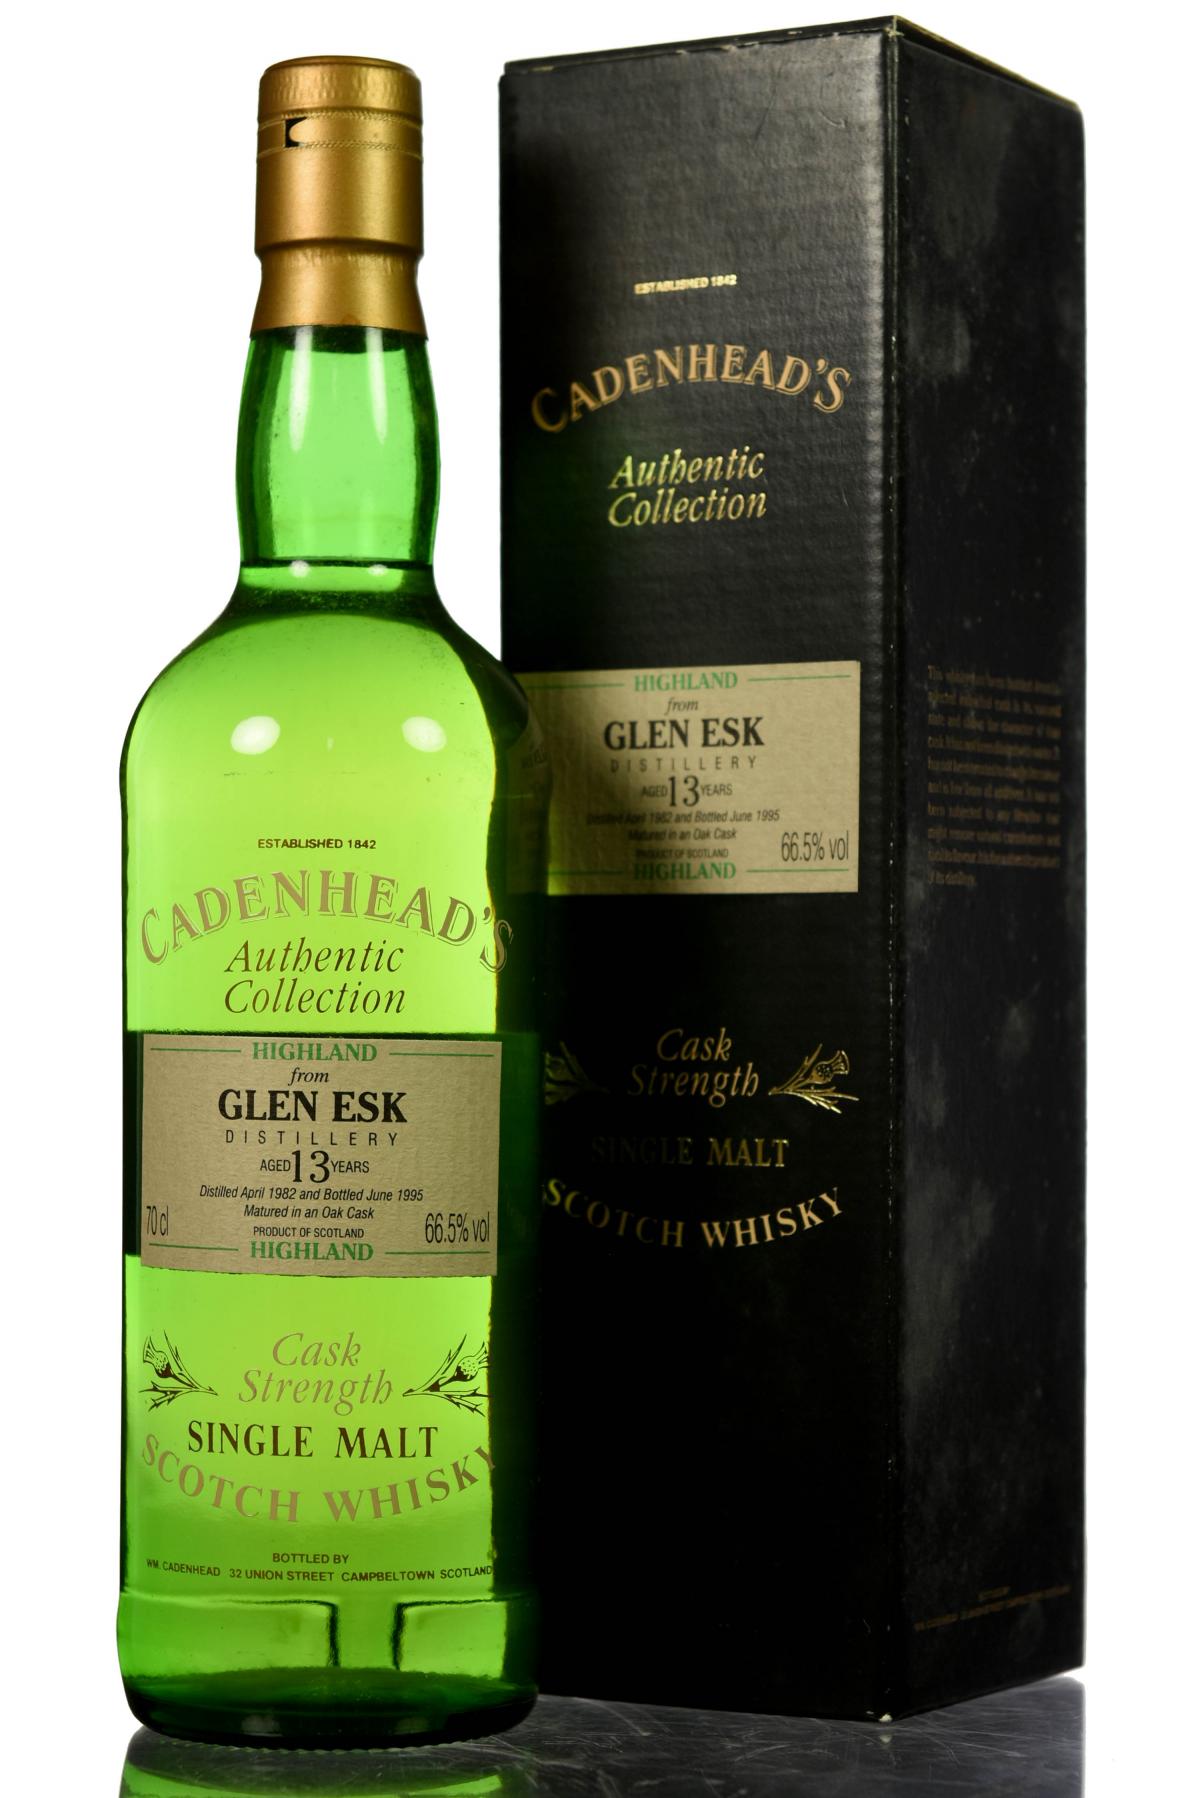 Glen Esk 1982-1995 - 13 Year Old - Cadenheads Authentic Collection